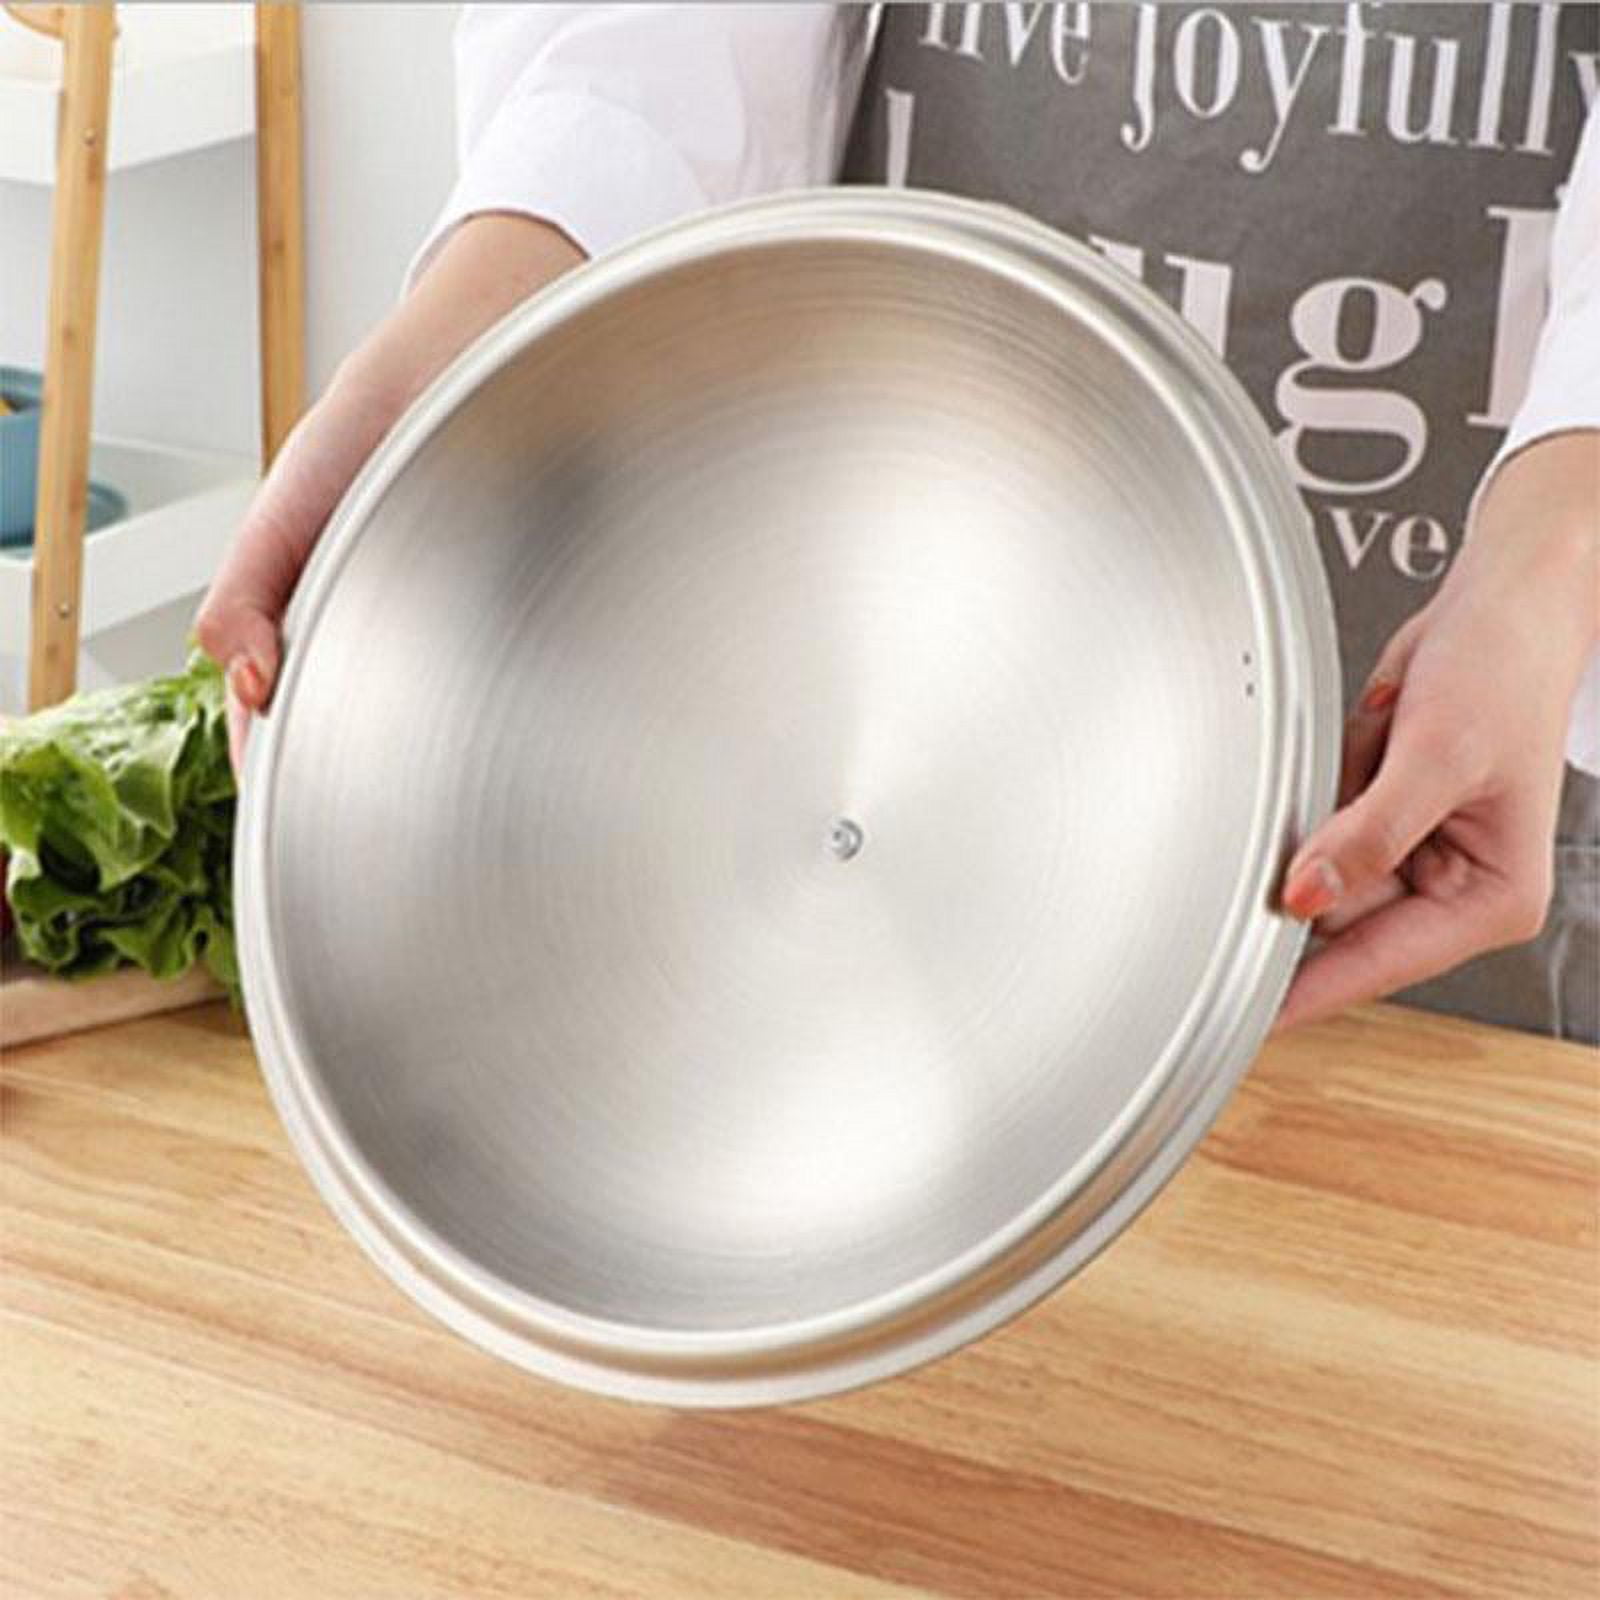  Cabilock 14 Pan Lid Stainless Steel Pot Lid Universal Pans Lid  Cover Cooking Pot Skillets Lid Round Dome Pot Replacement Frying Pan Cover Cookware  Lids Skillet 36cm: Home & Kitchen